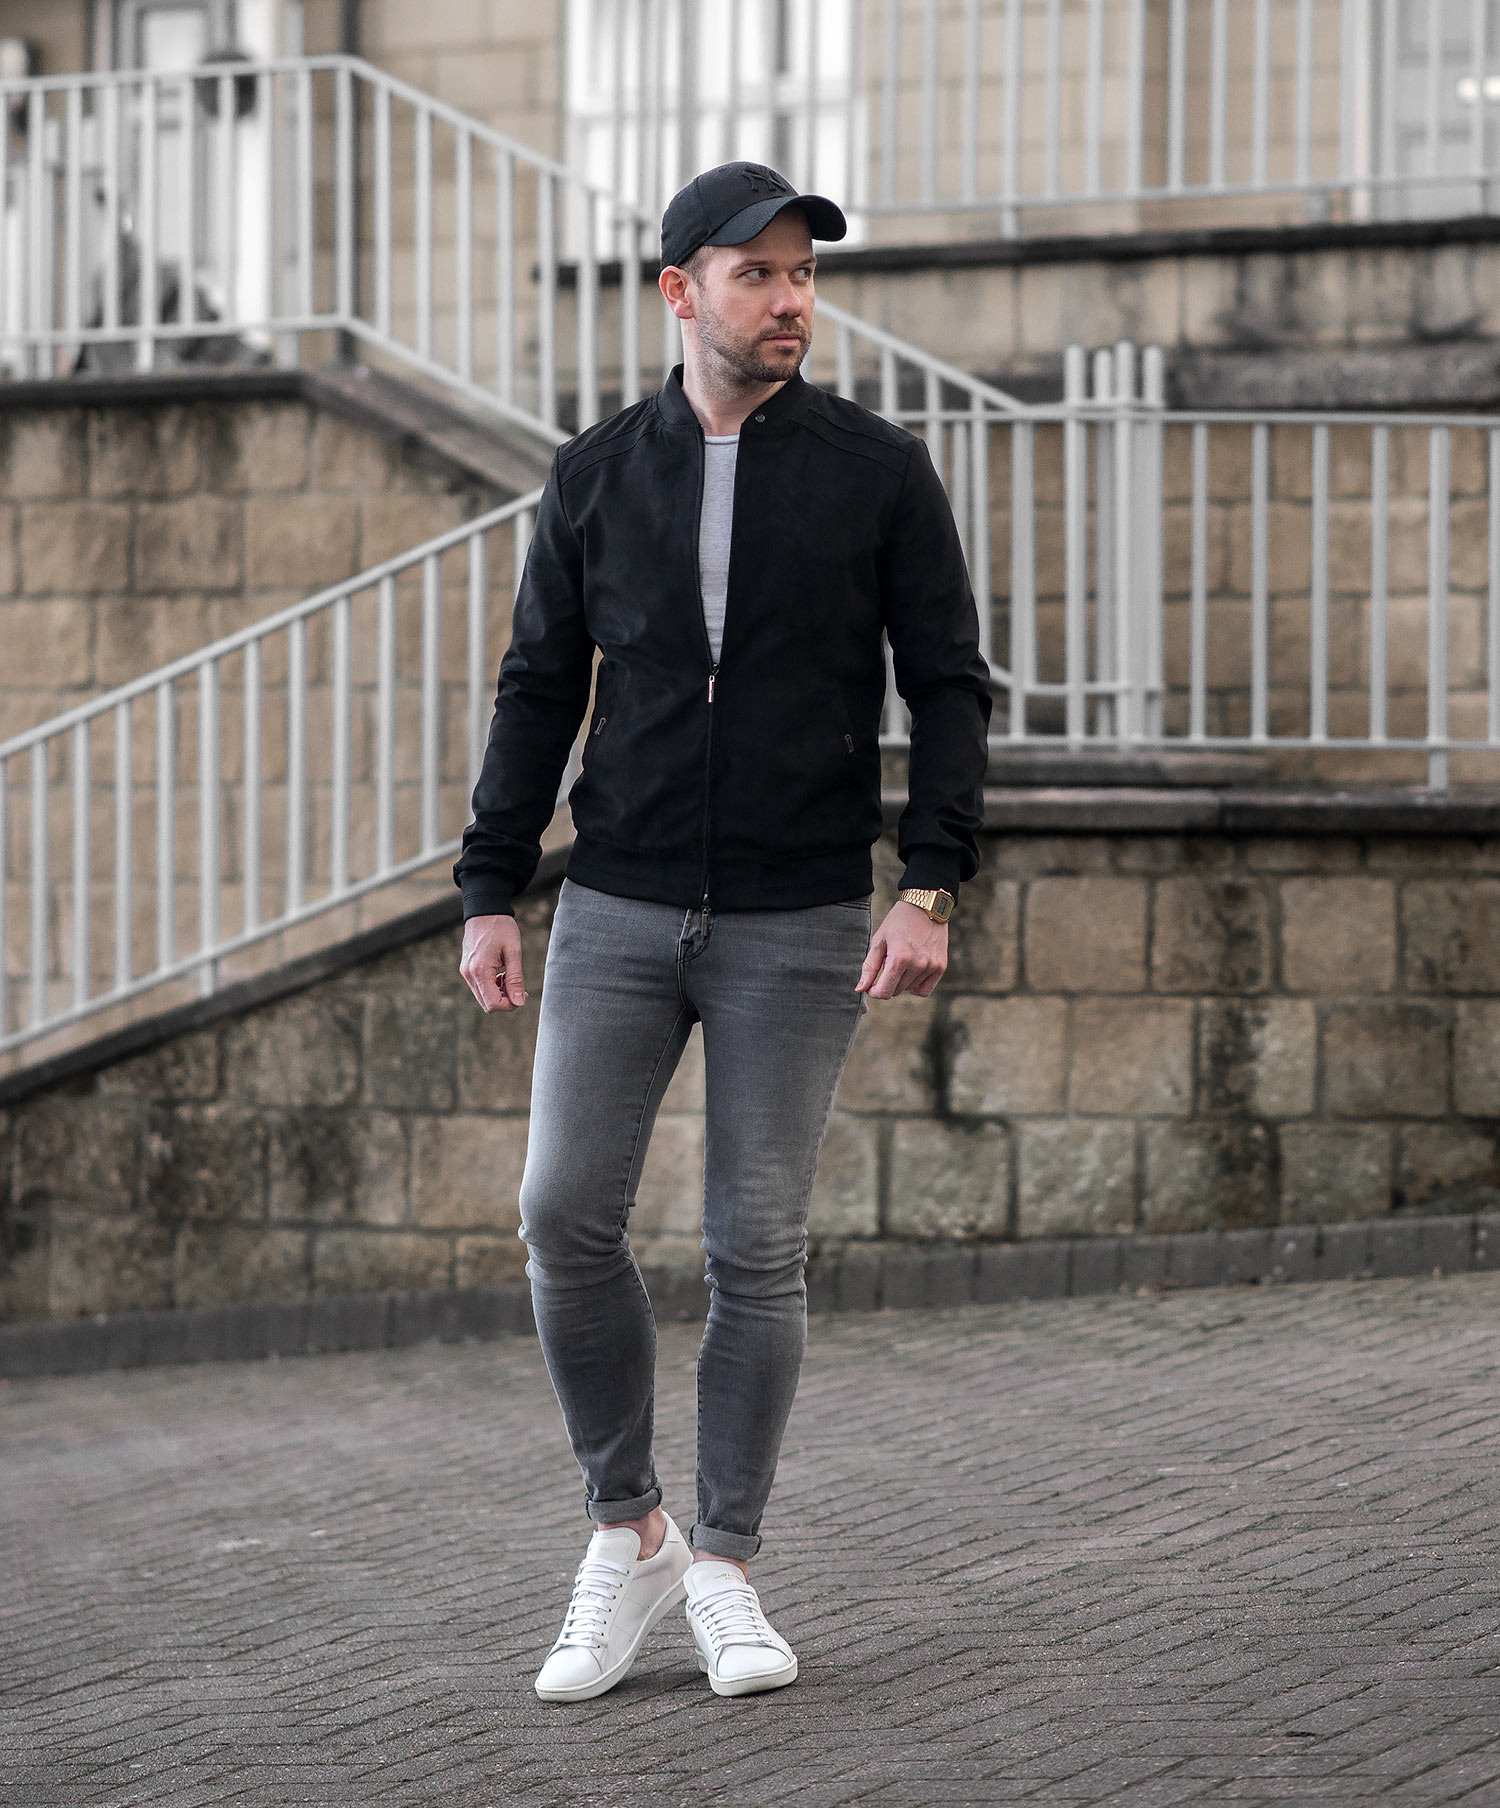 Styling A Black Suede Bomber Jacket Your Average Guy